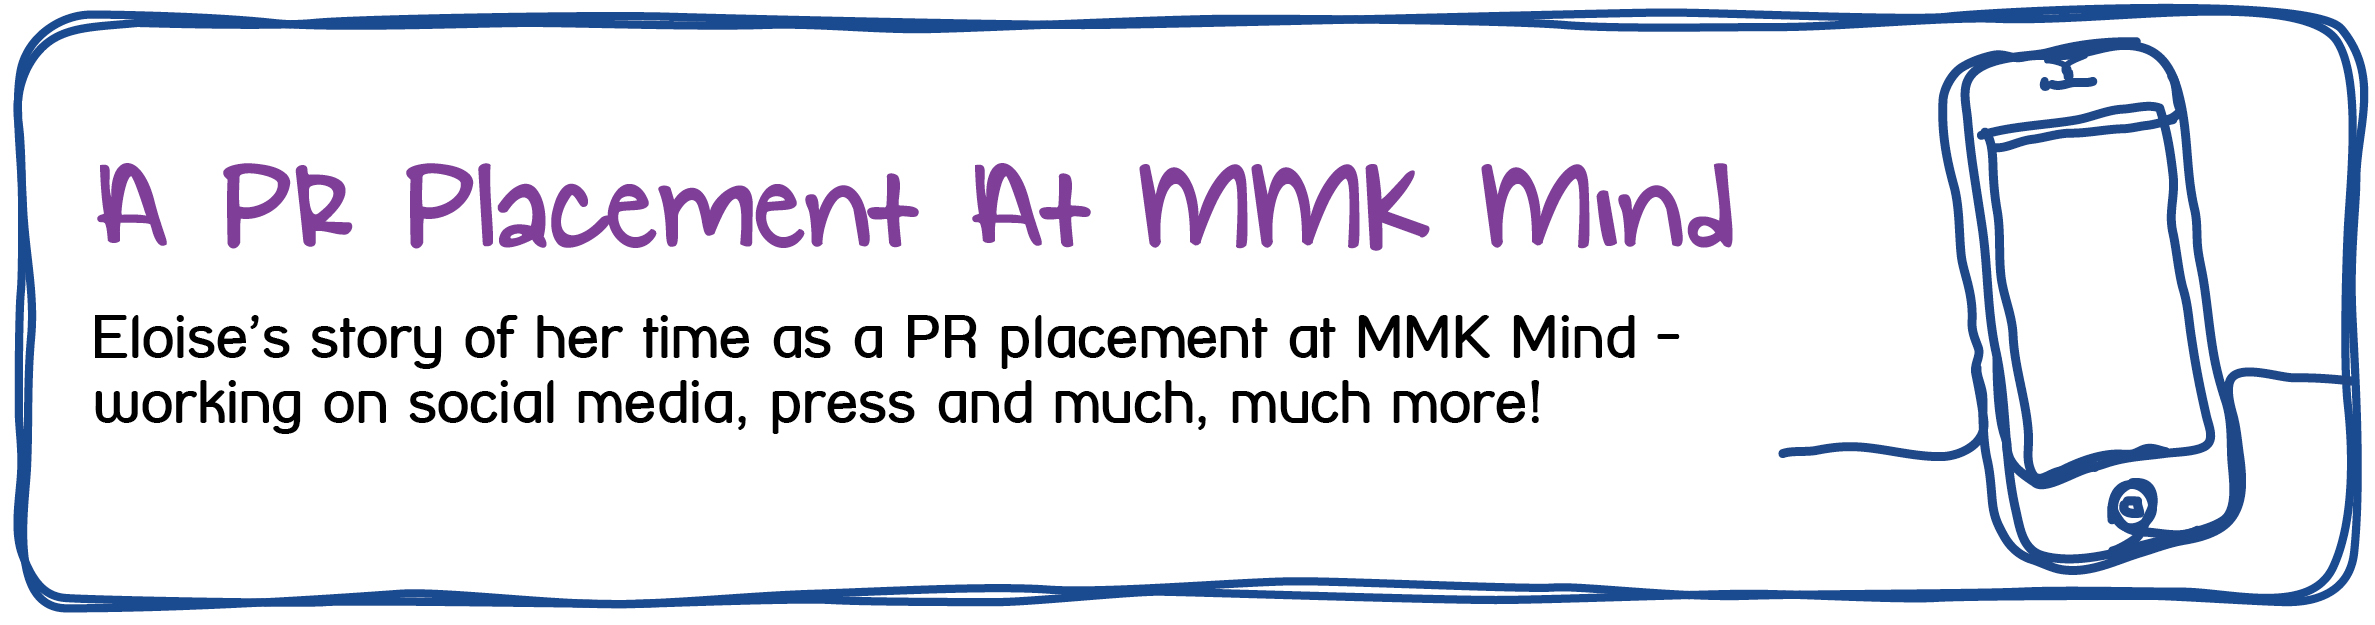 A Student Placement At MMK Mind - A Story of a student's time working on PR at MMK Mind.